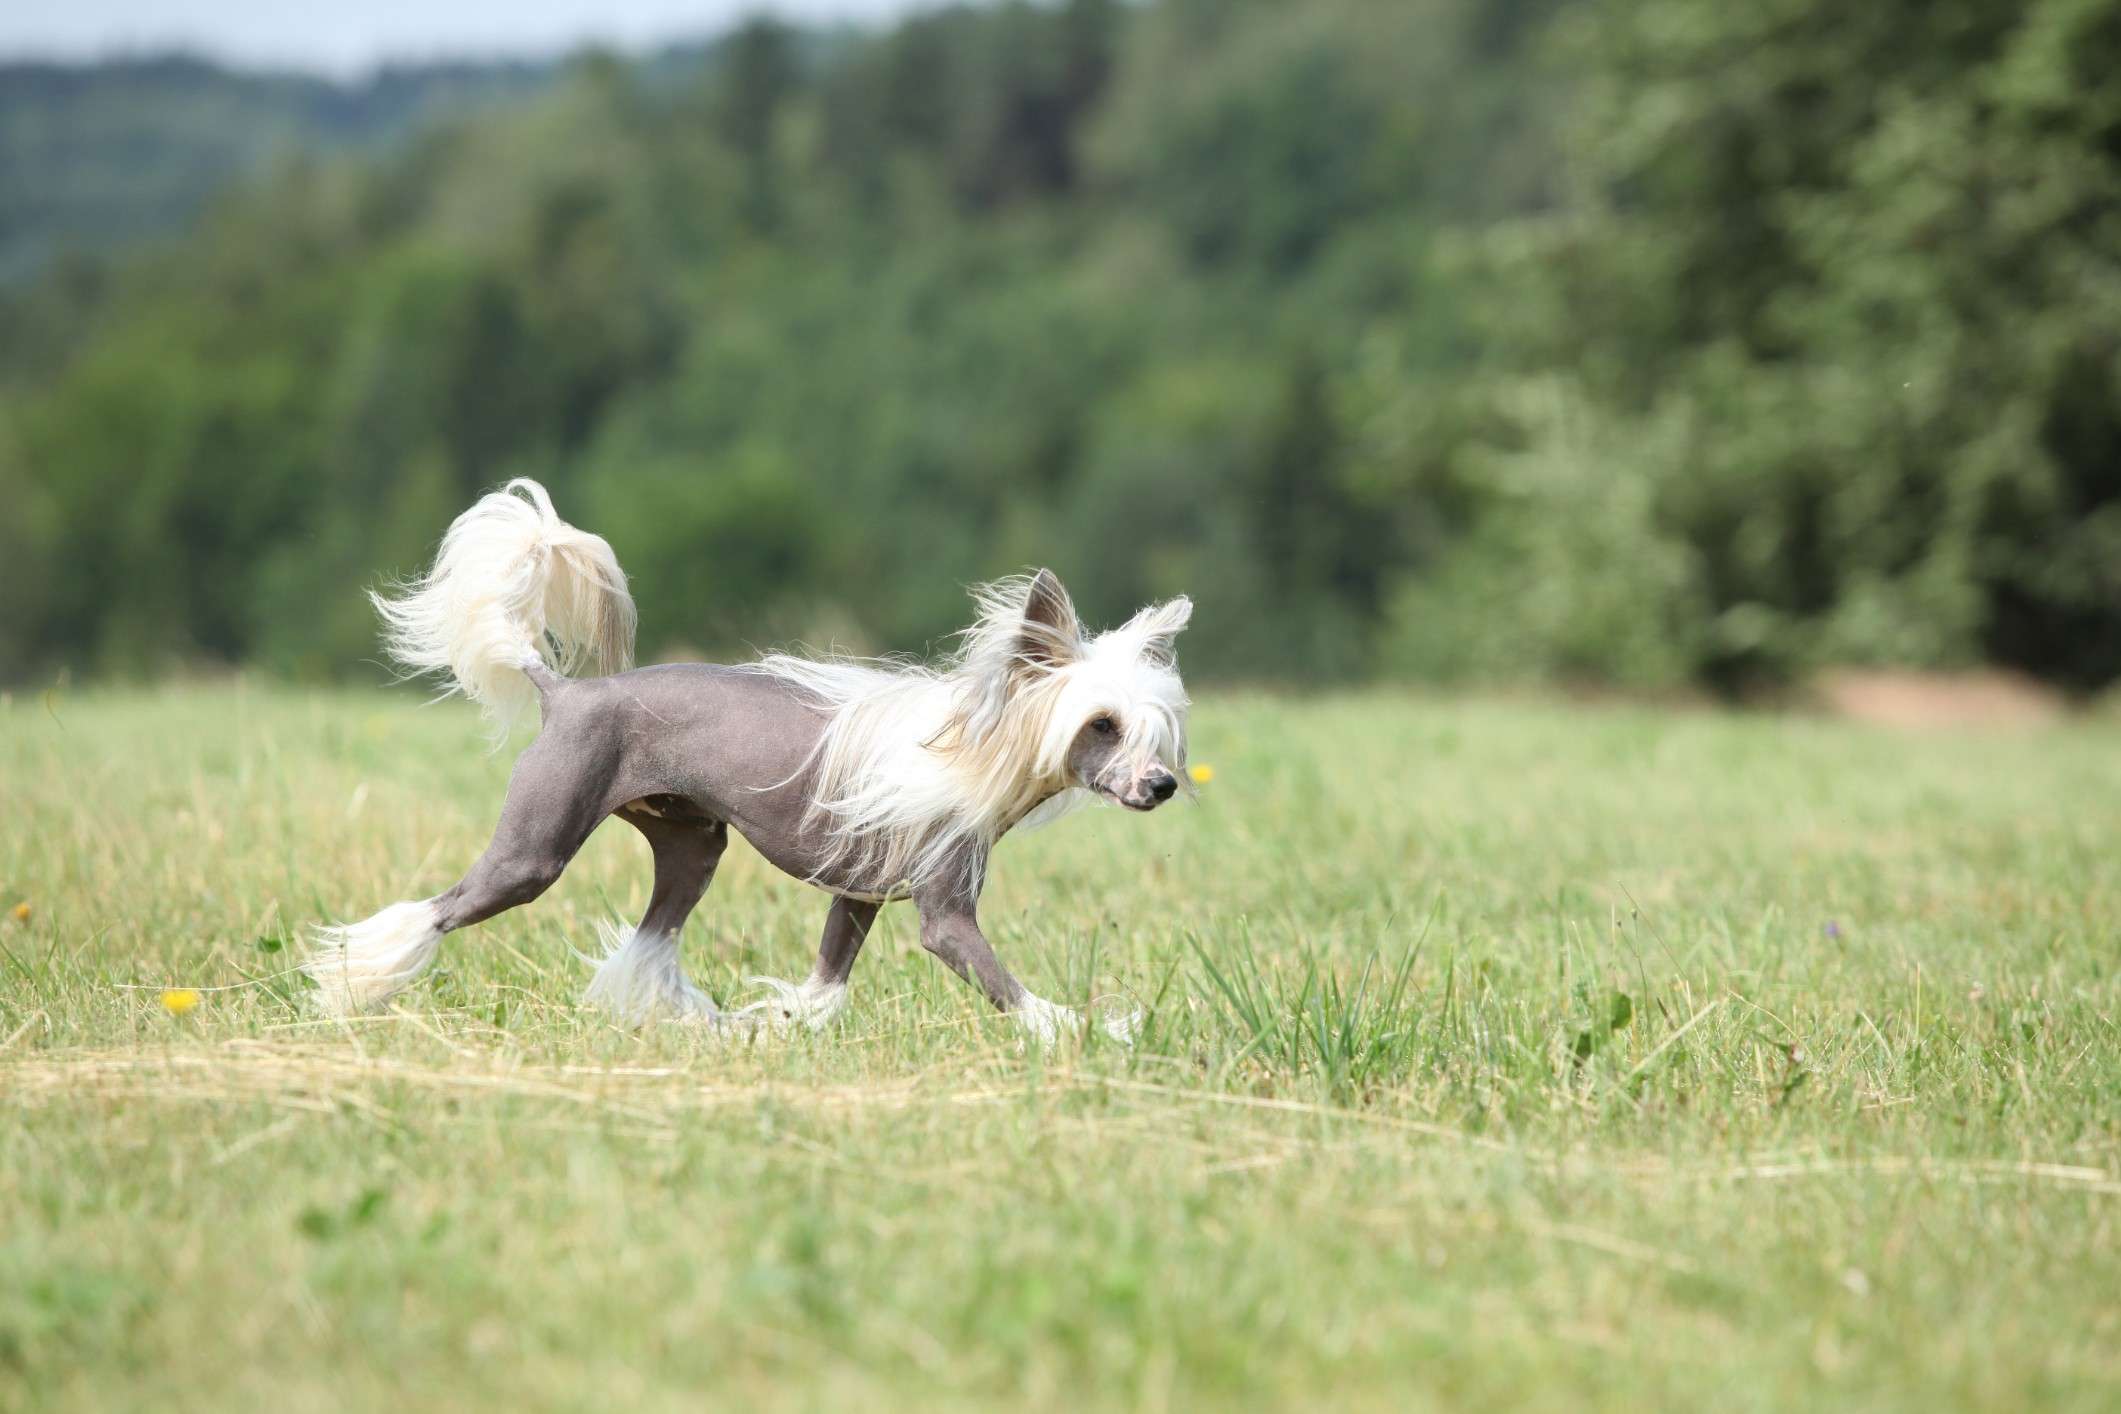 About Chinese Crested